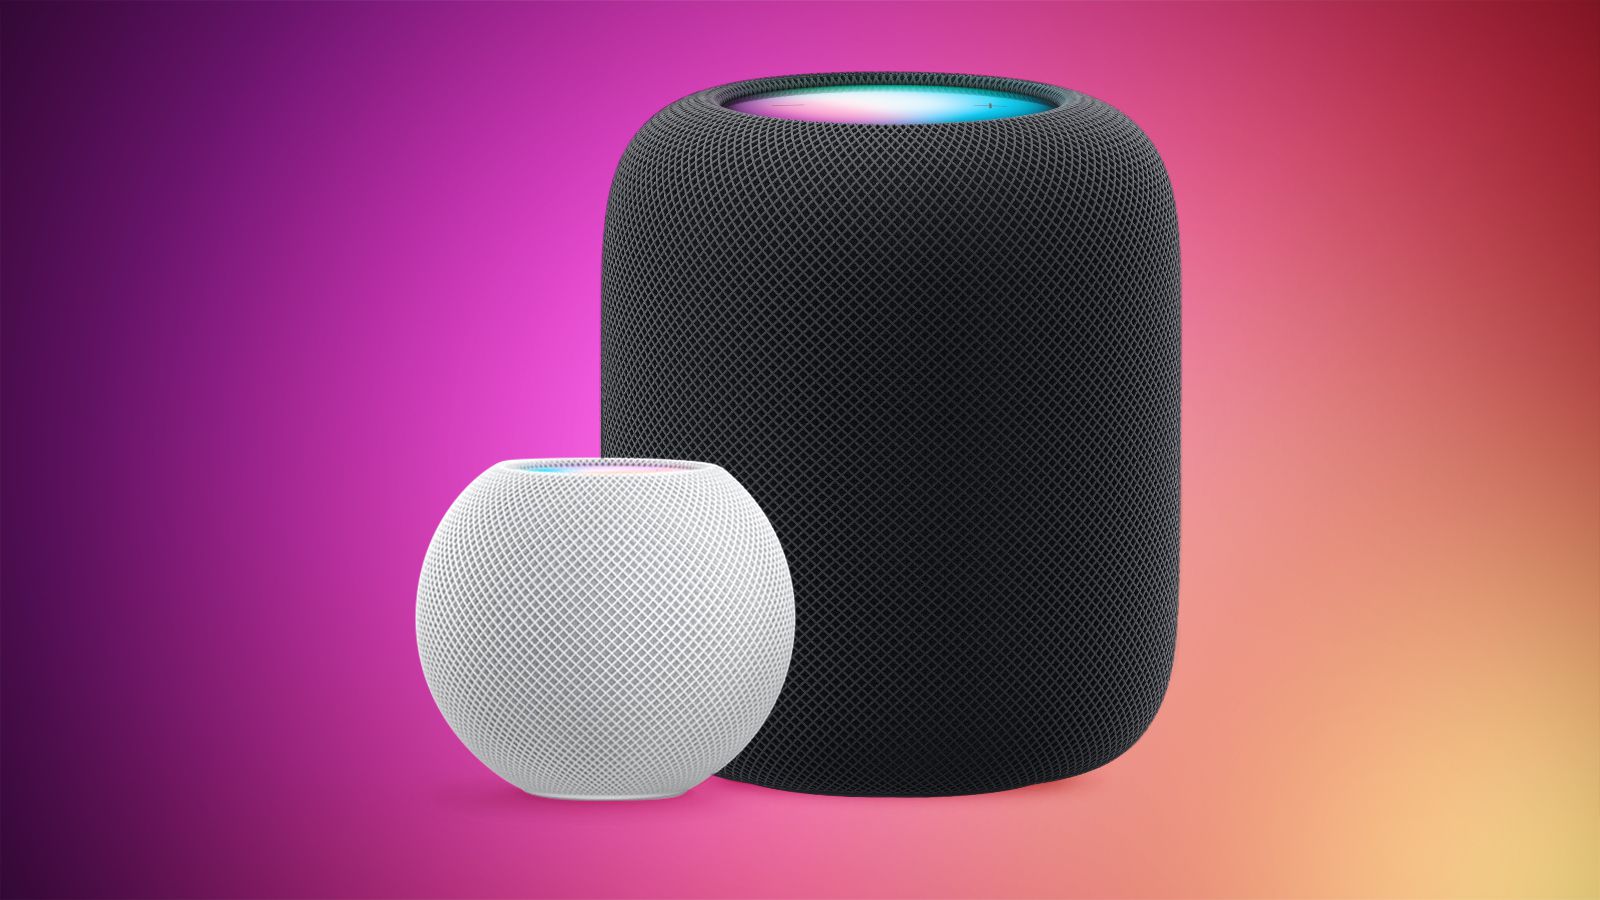 HomePod Can Now Alert You If Your Smoke Alarm Goes Off - macrumors.com